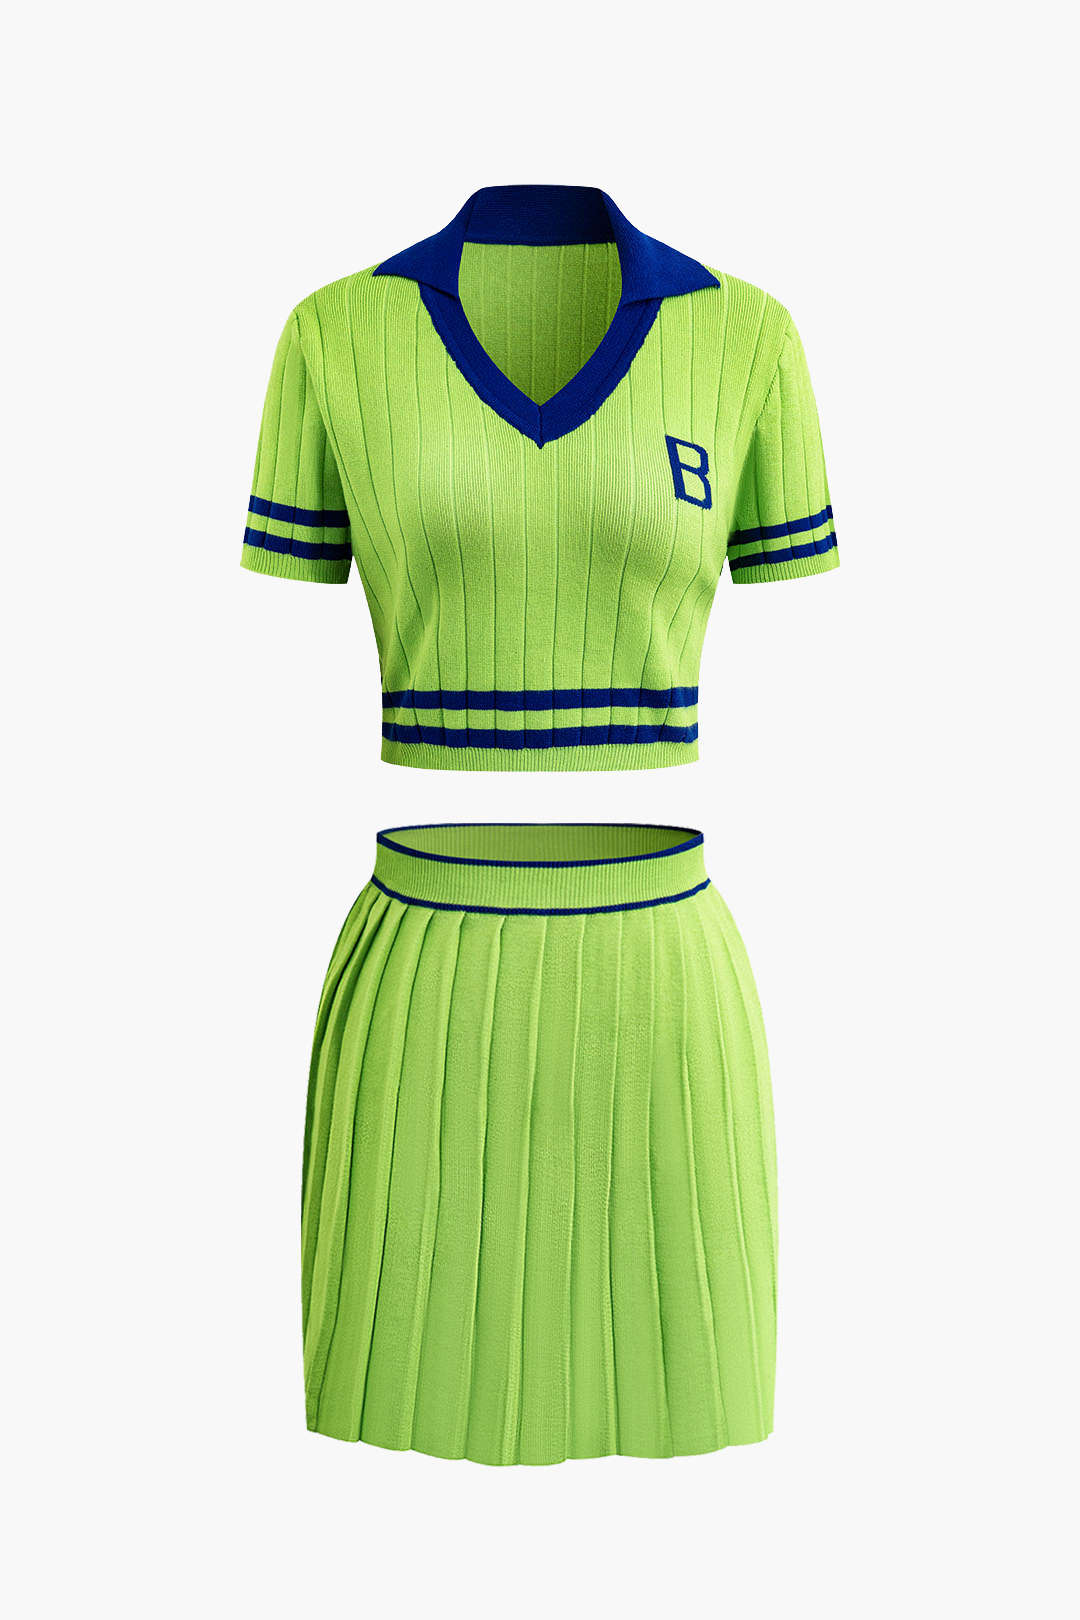 Lime Green and Navy Preppy Knit Tennis Dress with Pleated Skirt Set